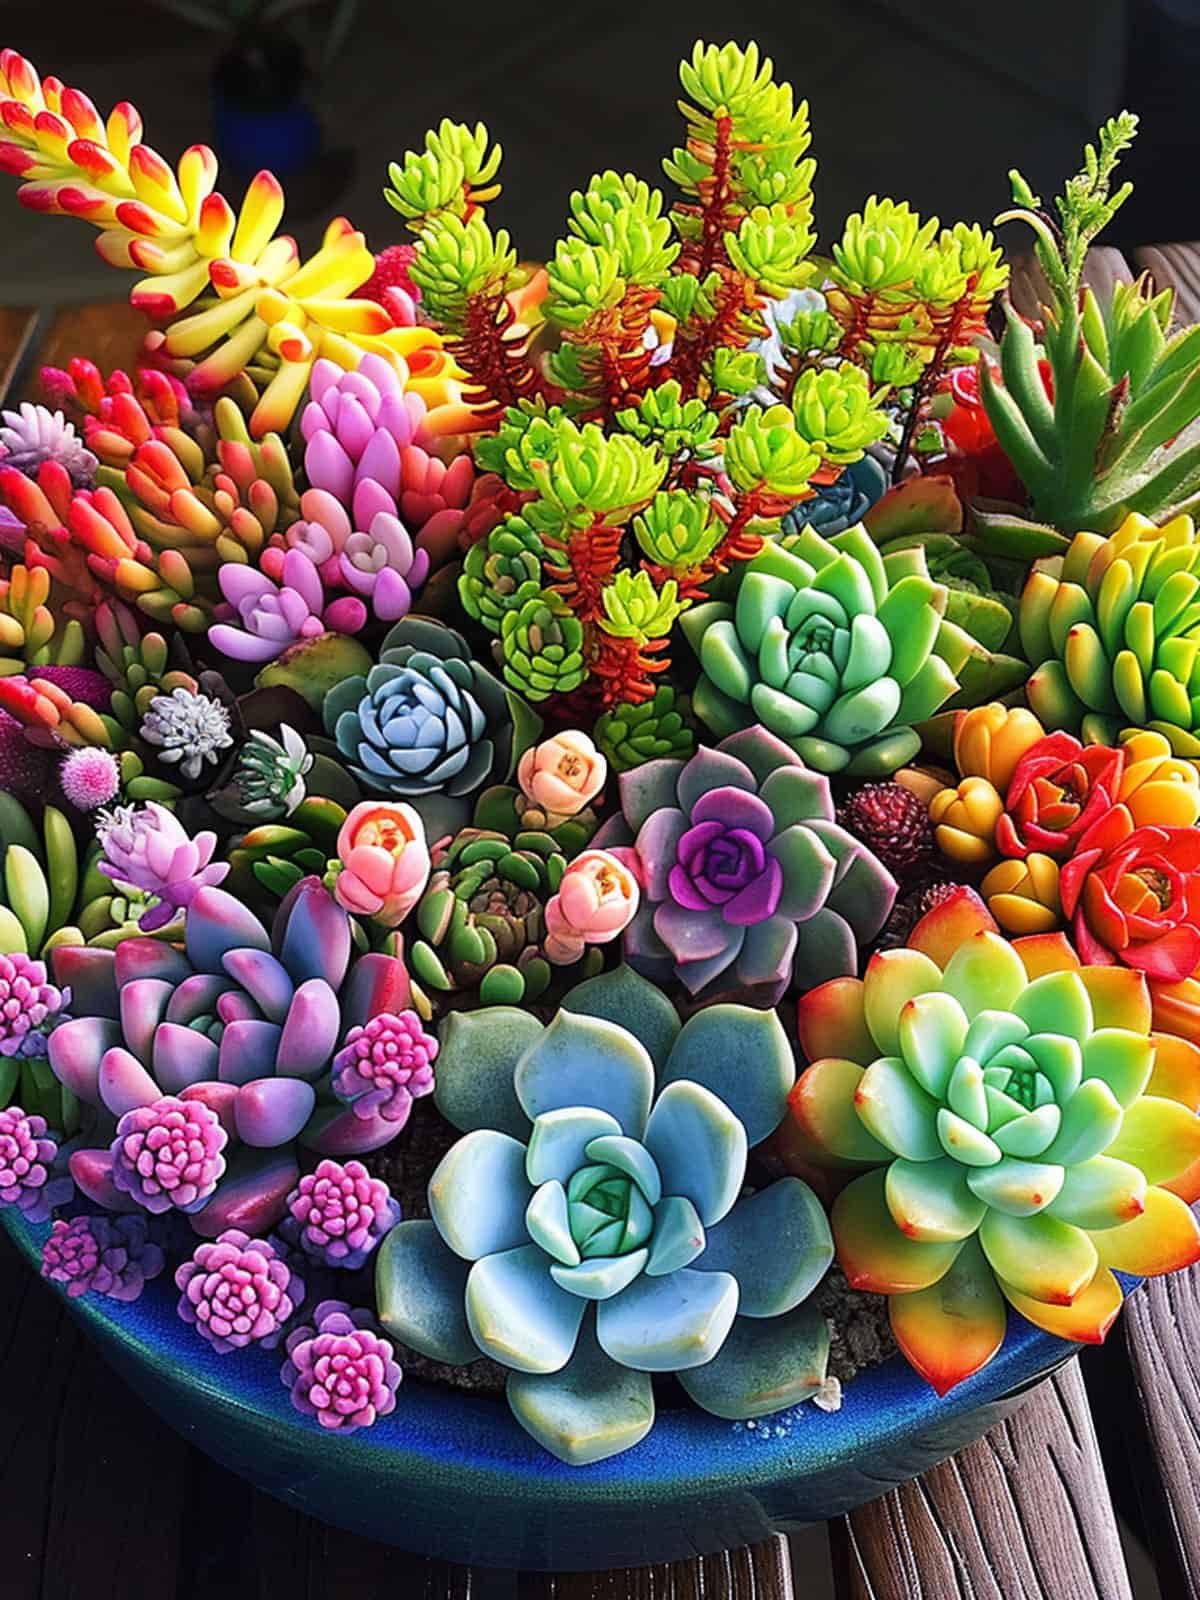 Different bright and vivid colored leaves of succulents